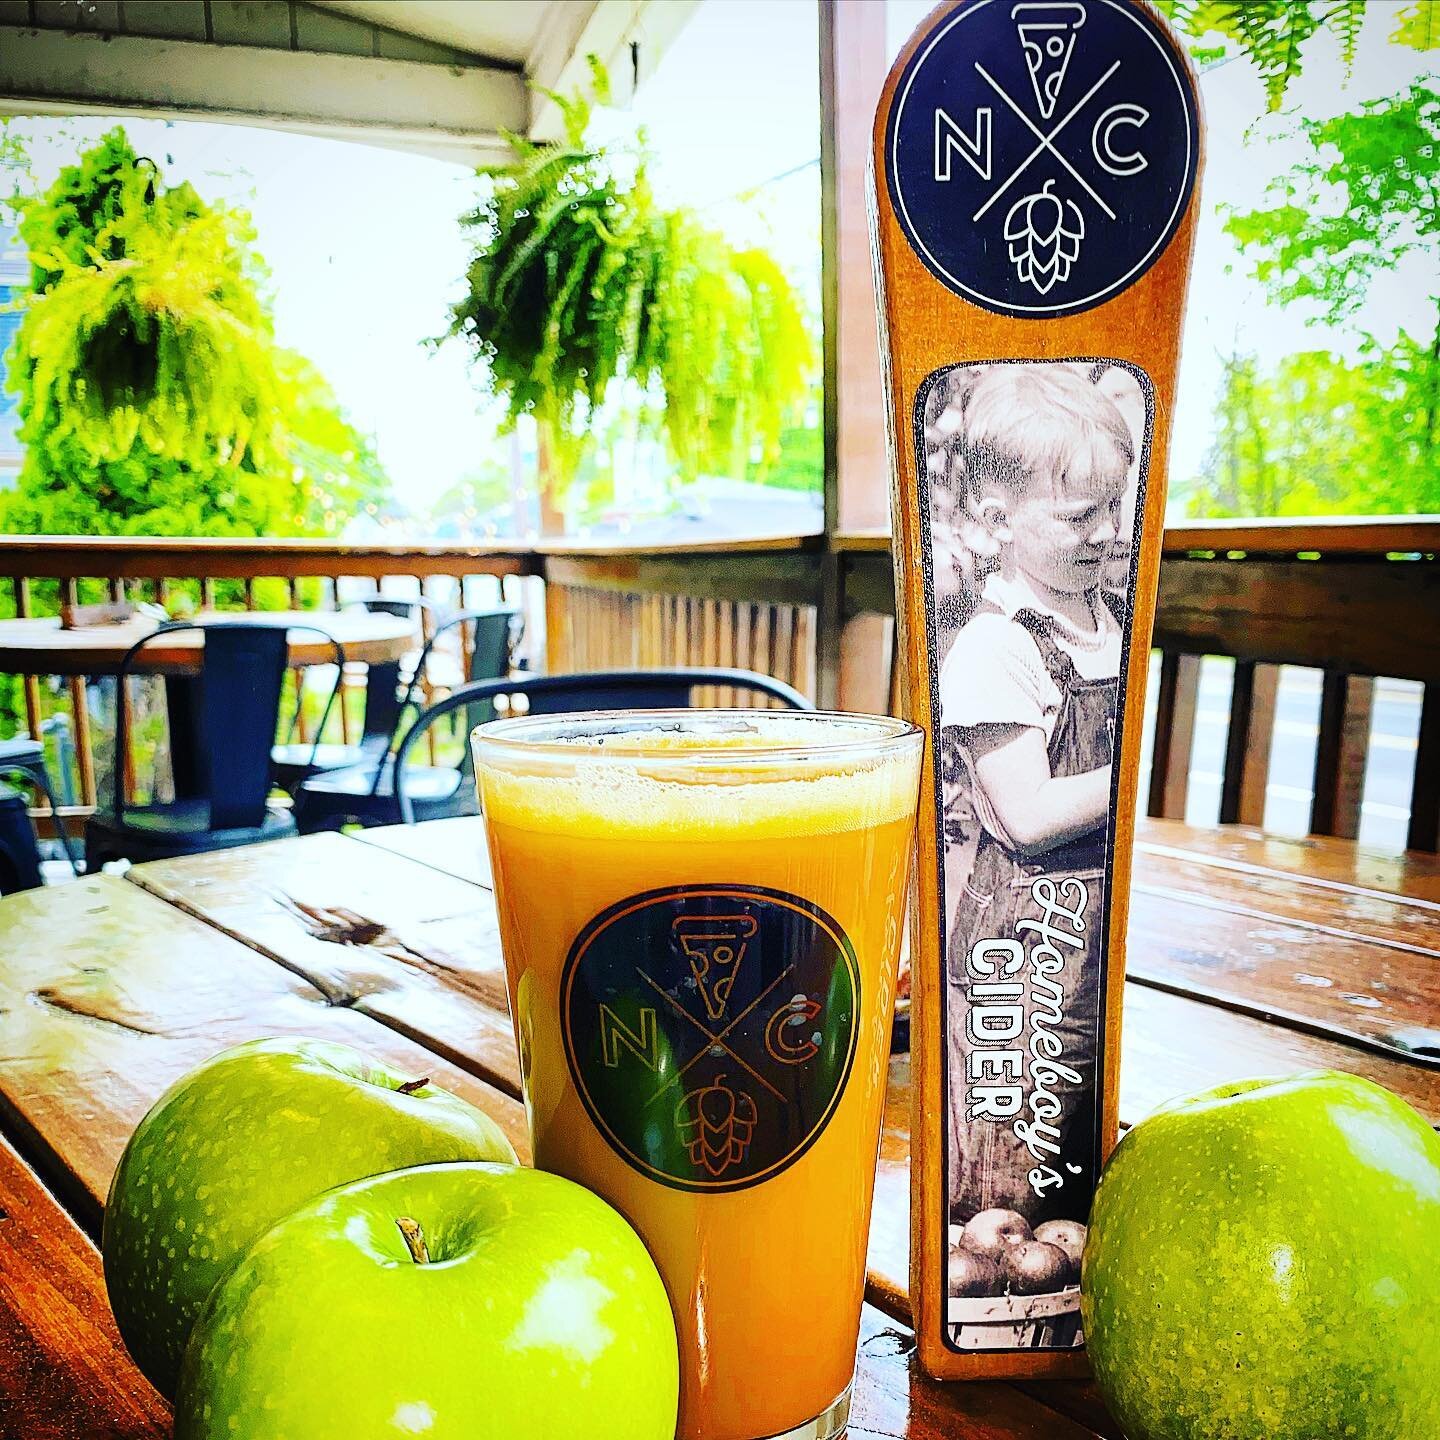 NEW CIDER: We&rsquo;re stoked to enter the cider game with the release of our &ldquo;Homeboy&rsquo;s Cider&rdquo;. You asked and we listened 😘 It&rsquo;s a really nice unfiltered cider truly capturing the flavors of fresh apples 🍎 #homeboyscider #c